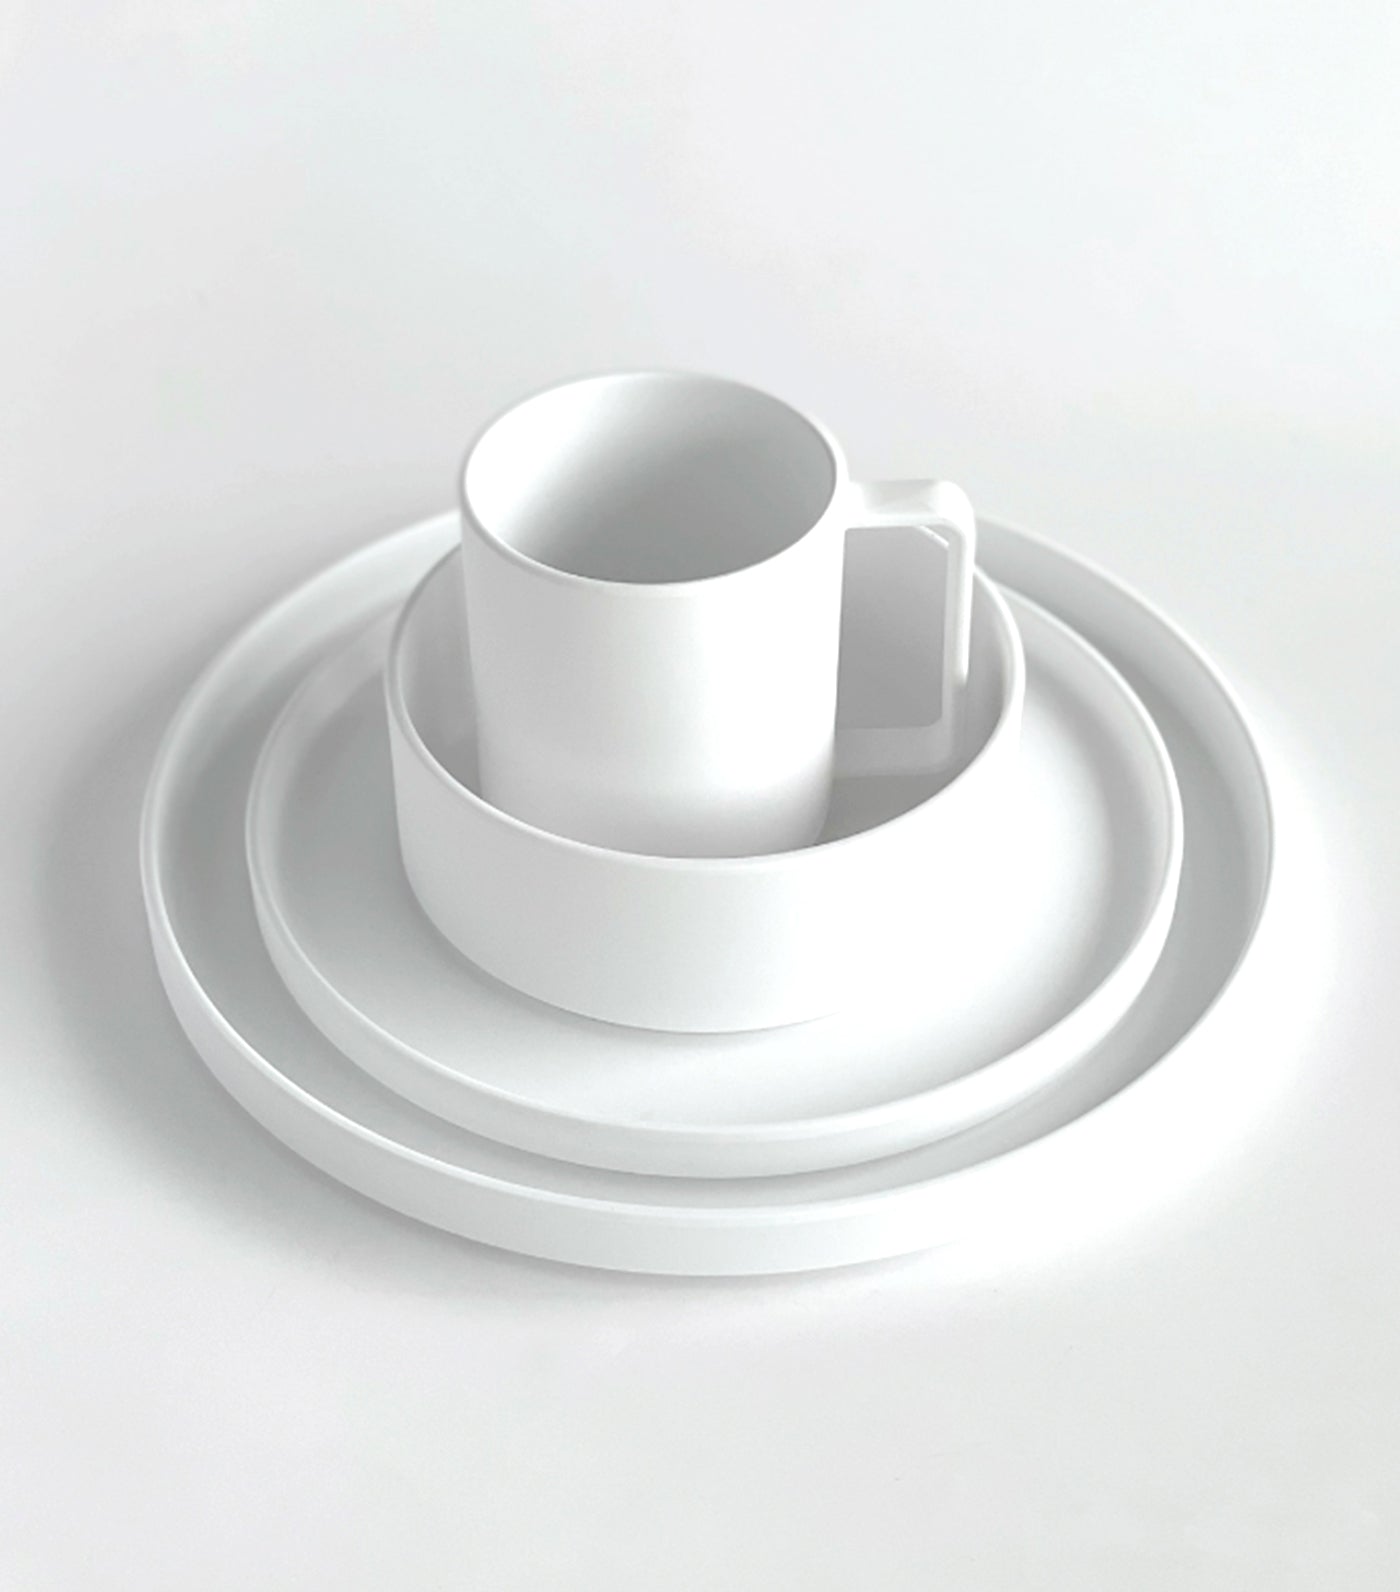 Simpli by Clever Spaces 4-Piece Dinnerware Set